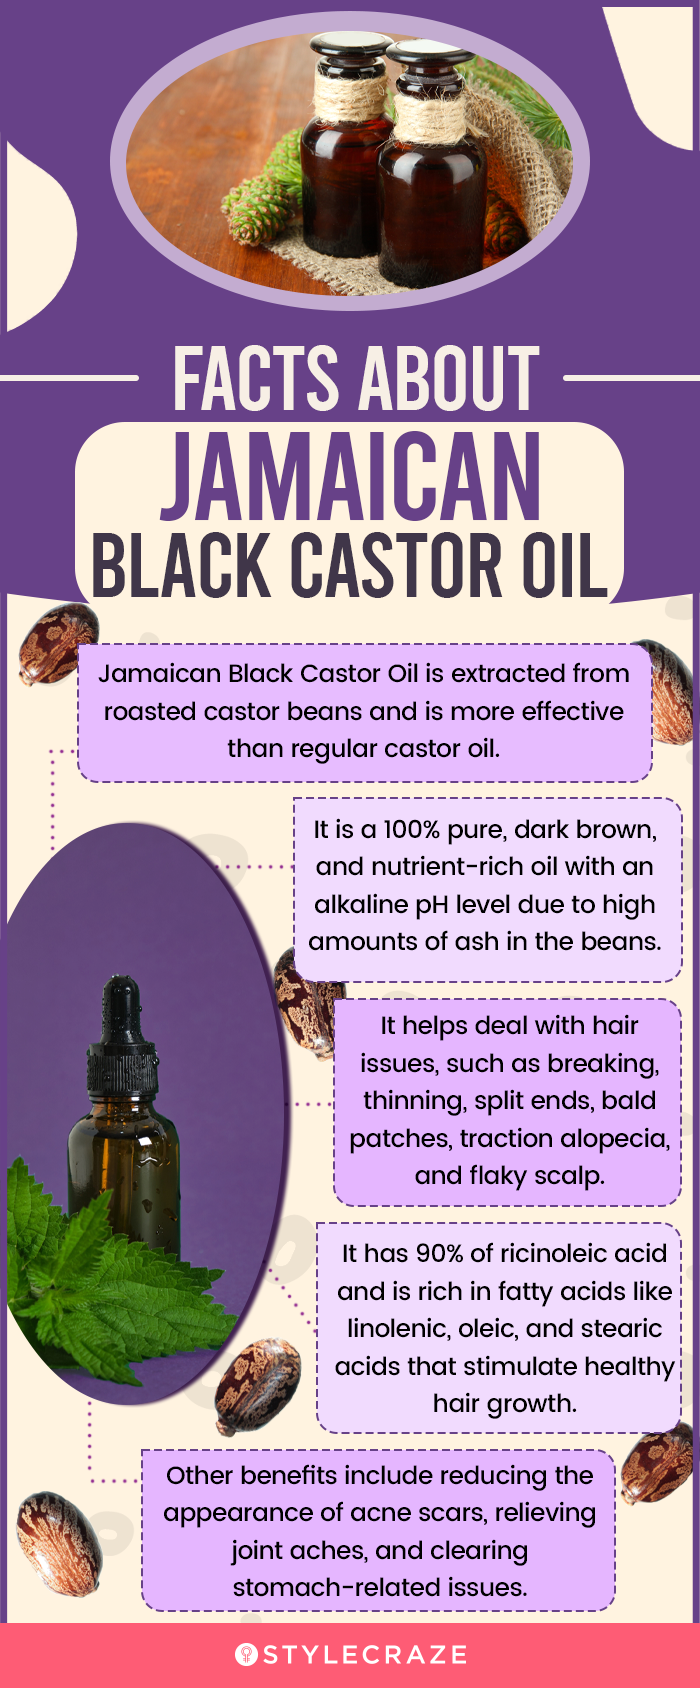 Facts About Jamaican Black Castor Oil (infographic)